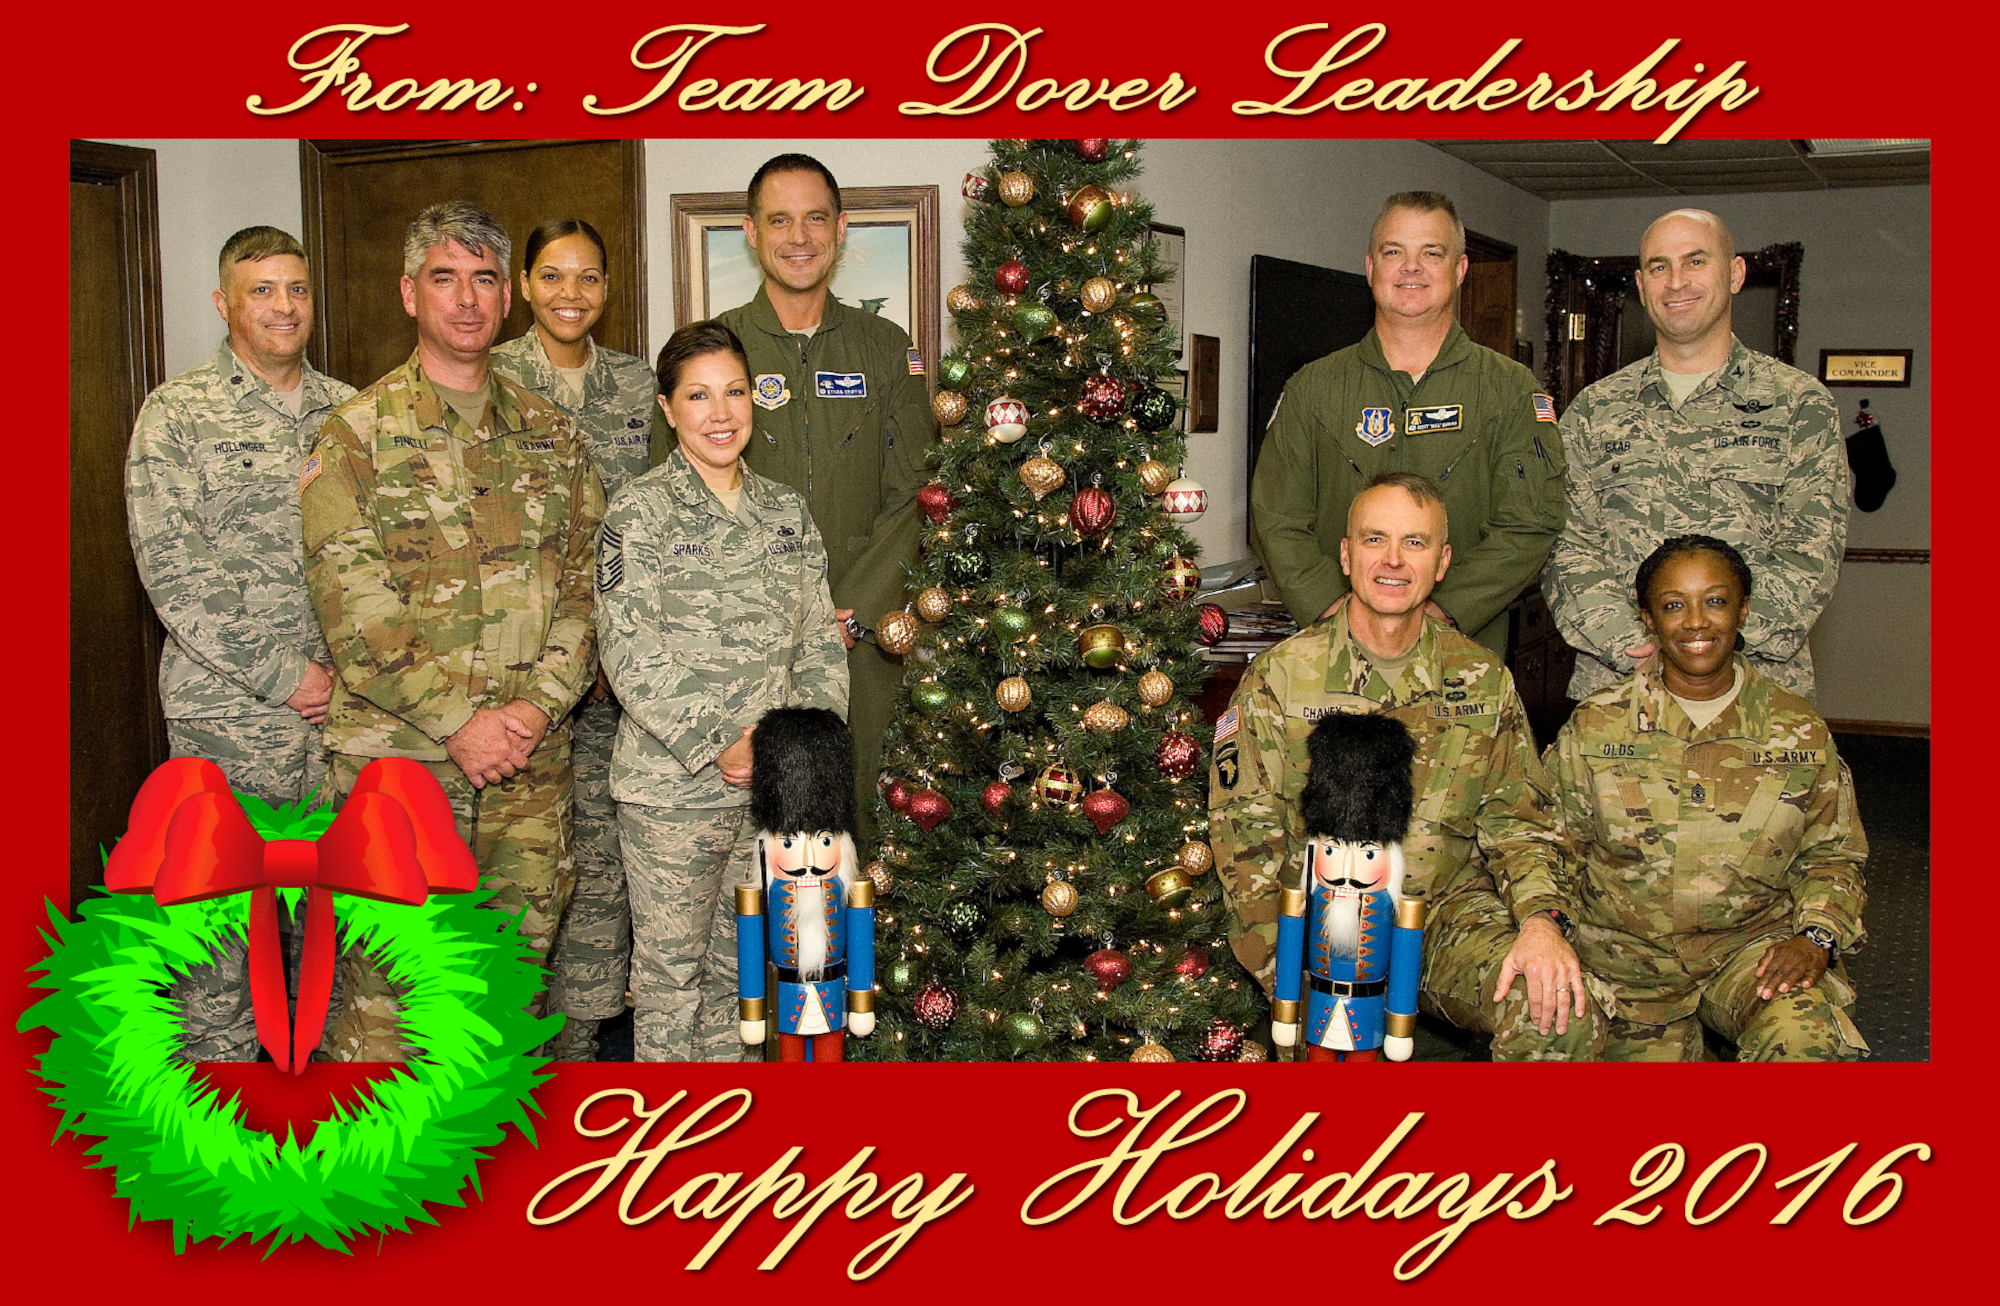 Team Dover senior leadership gather for a holiday photo in the command section of the 436th Airlift Wing building Dec. 7, 2016, at Dover Air Force Base, Del. Pictured are from back row left to right: Lt. Col. Chip Hollinger, Air Force Mortuary Affairs Office deputy commander; Chief Master Sgt. Meshelle Dyer AFMAO chief enlisted manager; Col. Ethan Griffin, 436th AW commander; Col. D. Scott Durham, 512th AW commander; Col. Scott Gaab, 436th AW vice commander; front row left: Army Col. Louis Finelli, Armed Forces Medical Examiner System director; Chief Master Sgt. Sarah Sparks, 436th AW command chief; Army Lt. Col. Kim Chaney, Joint Personnel Effects Depot commander, and Army Sgt. Maj. Cendric Olds, JPED senior enlisted advisor, gather for a holiday photo in the command section of the 436th AW building Dec. 7. 2016, at Dover Air Force Base, Del. (U.S. Air Force photo illustration by Staff Sgt. Jared Duhon)